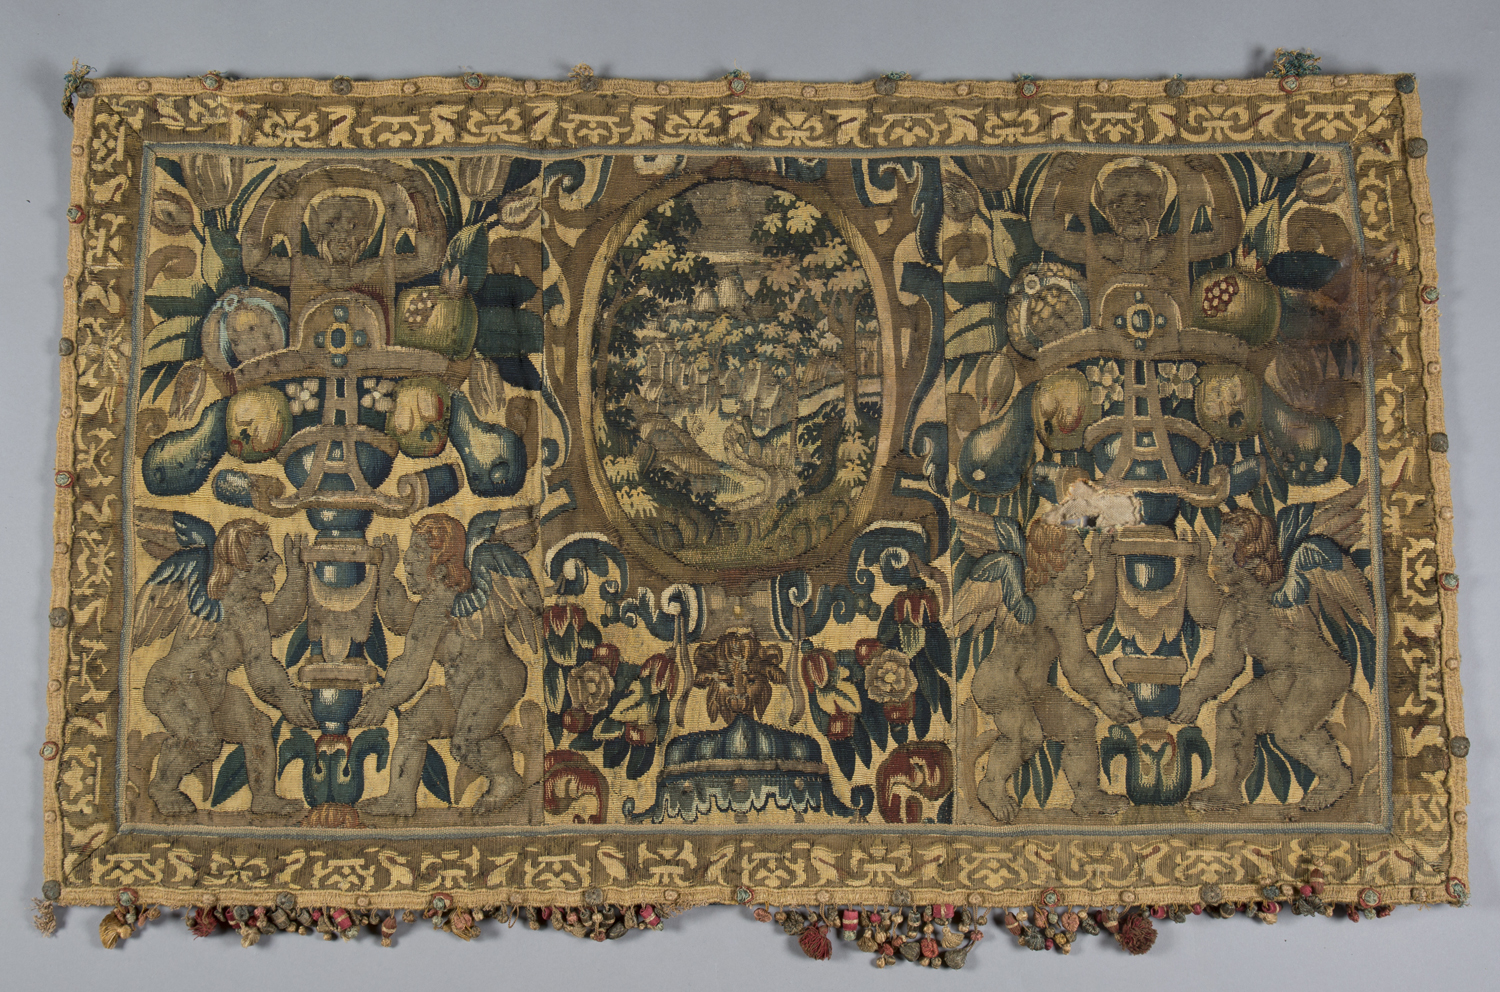 A Flemish tapestry border fragment, mid/late 16th century, probably Brussels, the central oval